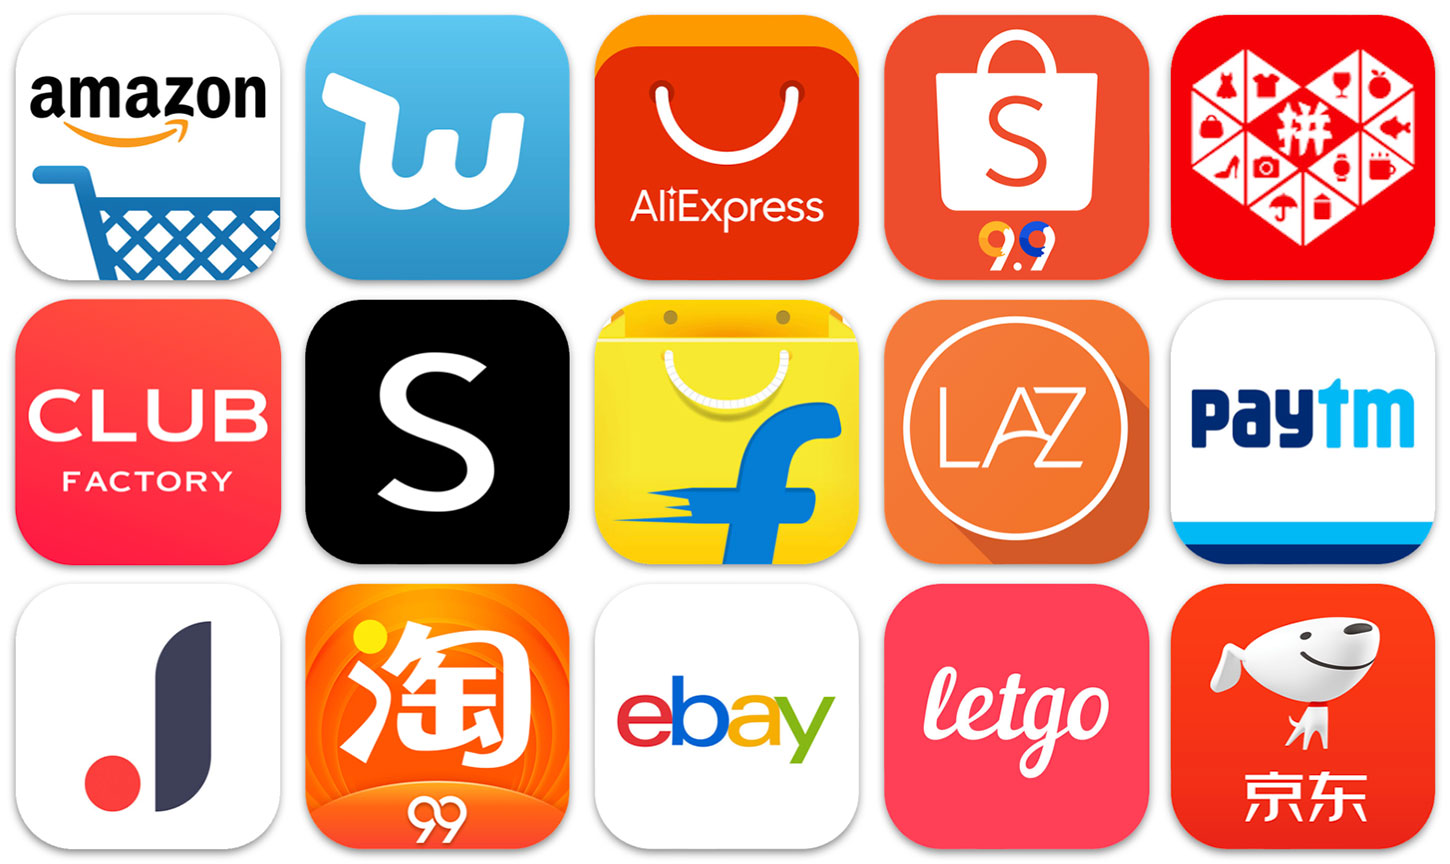 Shopping App Downloads Reached Record 1.1 Billion Globally in Q3 2019